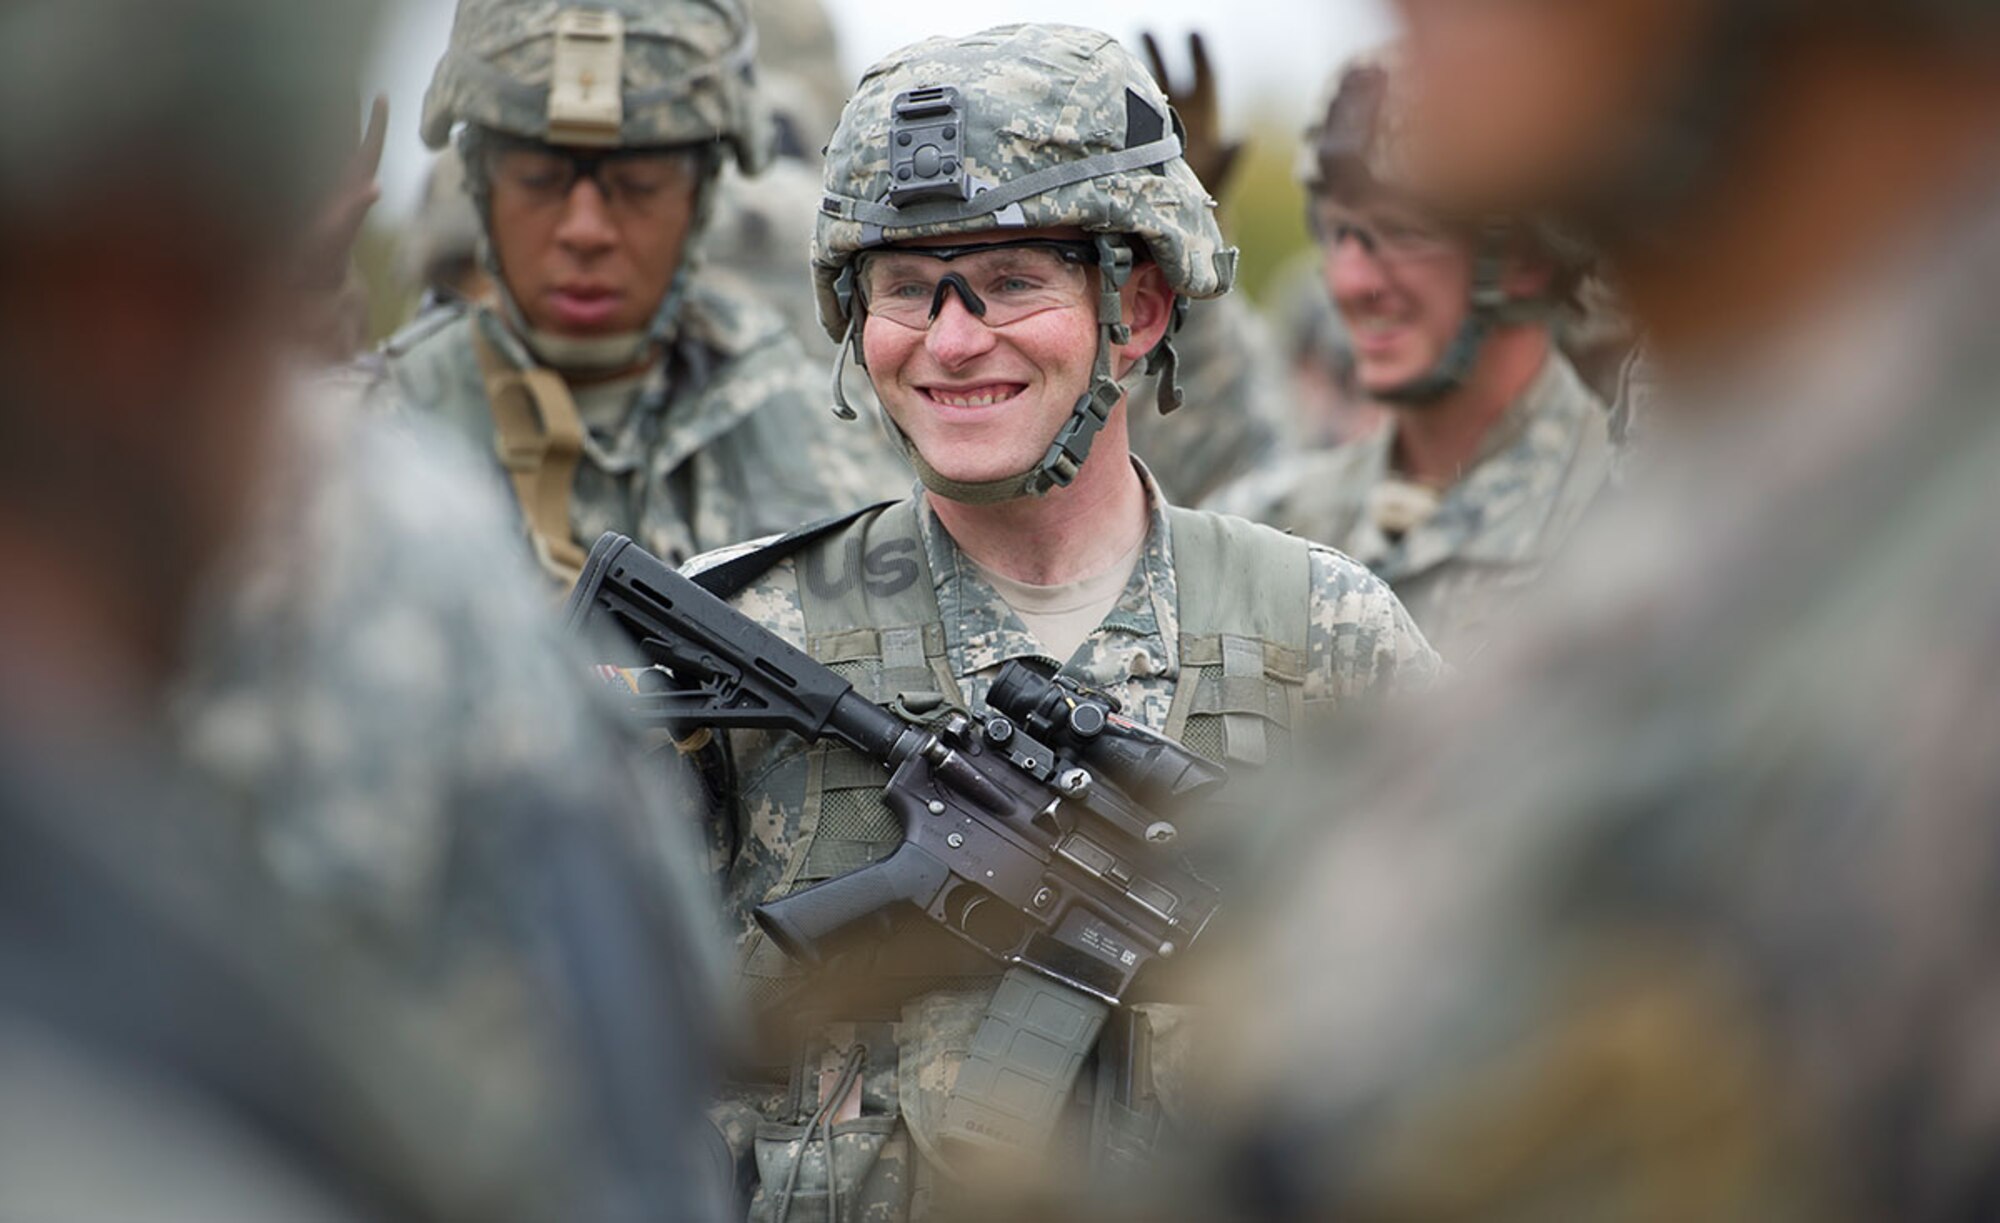 Army Staff Sgt. Justin Barros, a native of Columbia, Conn., assigned to  Alpha Company, 4th Infantry Brigade Combat Team (Airborne), 25th Infantry Division, U.S. Army Alaska, smiles as he awaits instructions on the land navigation course during Expert Infantryman Badge qualification on Joint Base Elmendorf-Richardson, Tuesday, Sept. 9, 2014. The Expert Infantryman Badge was approved by the Secretary of War on October 7, 1943, and is currently awarded to U.S. Army personnel who hold infantry or special forces military occupational specialties and successfully pass the rigors of the course. (U.S. Air Force photo/Justin Connaher)